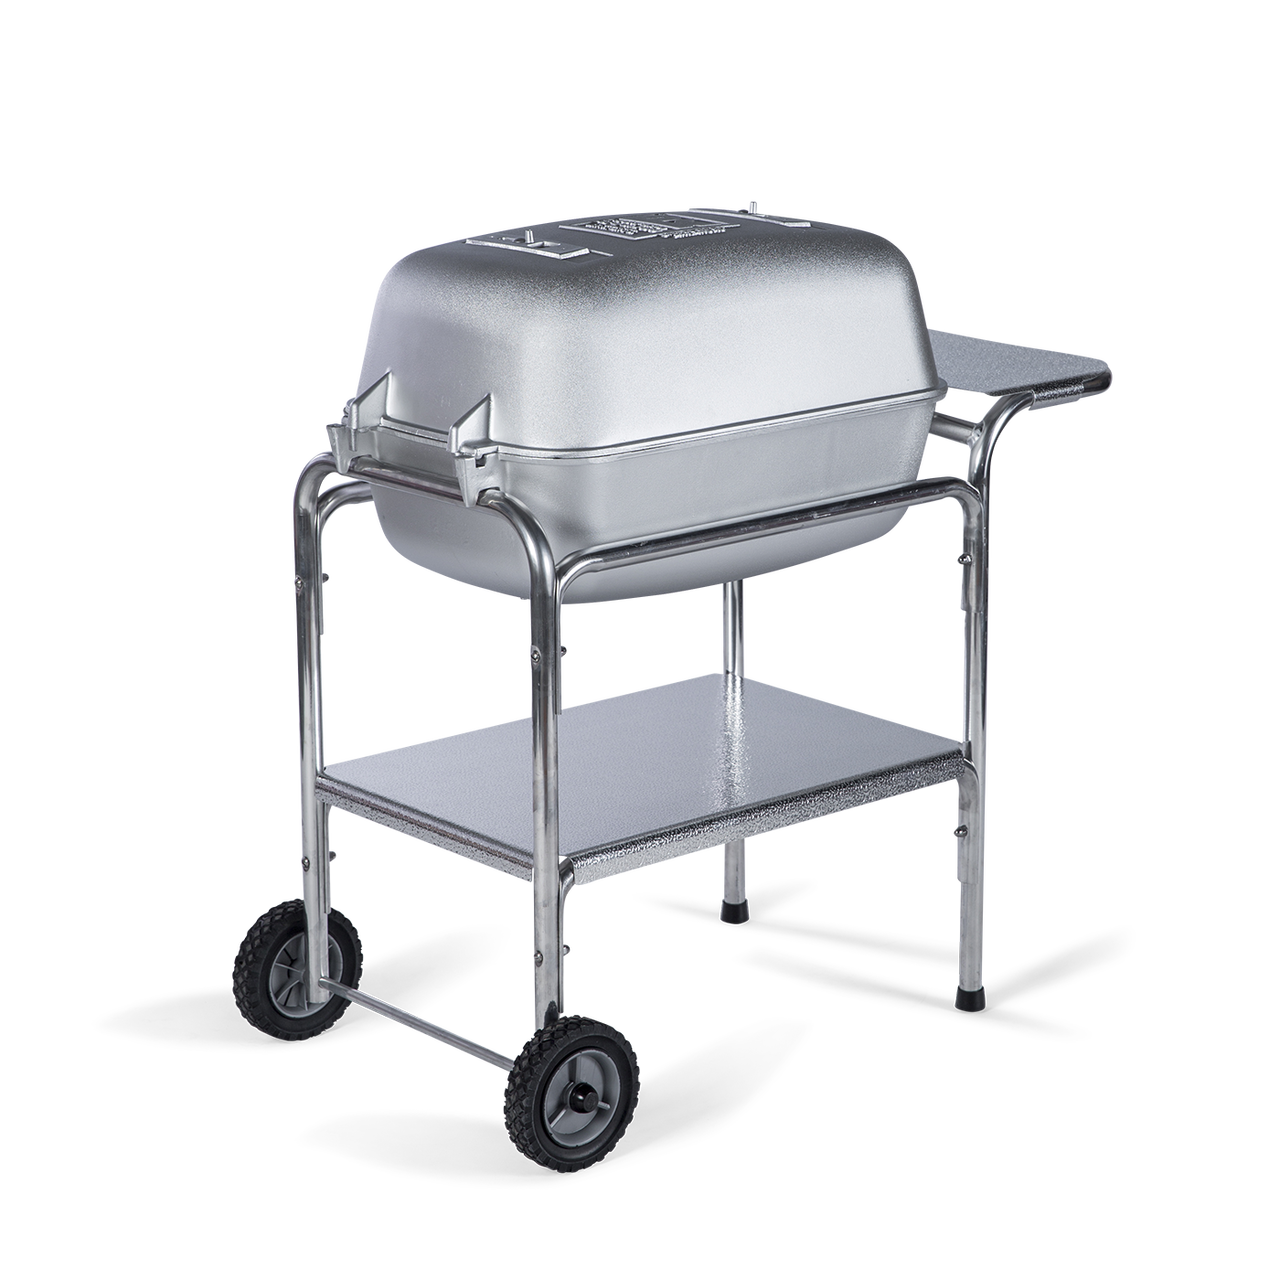 PK Grills the Original PK Grill and Smoker Silver Back View